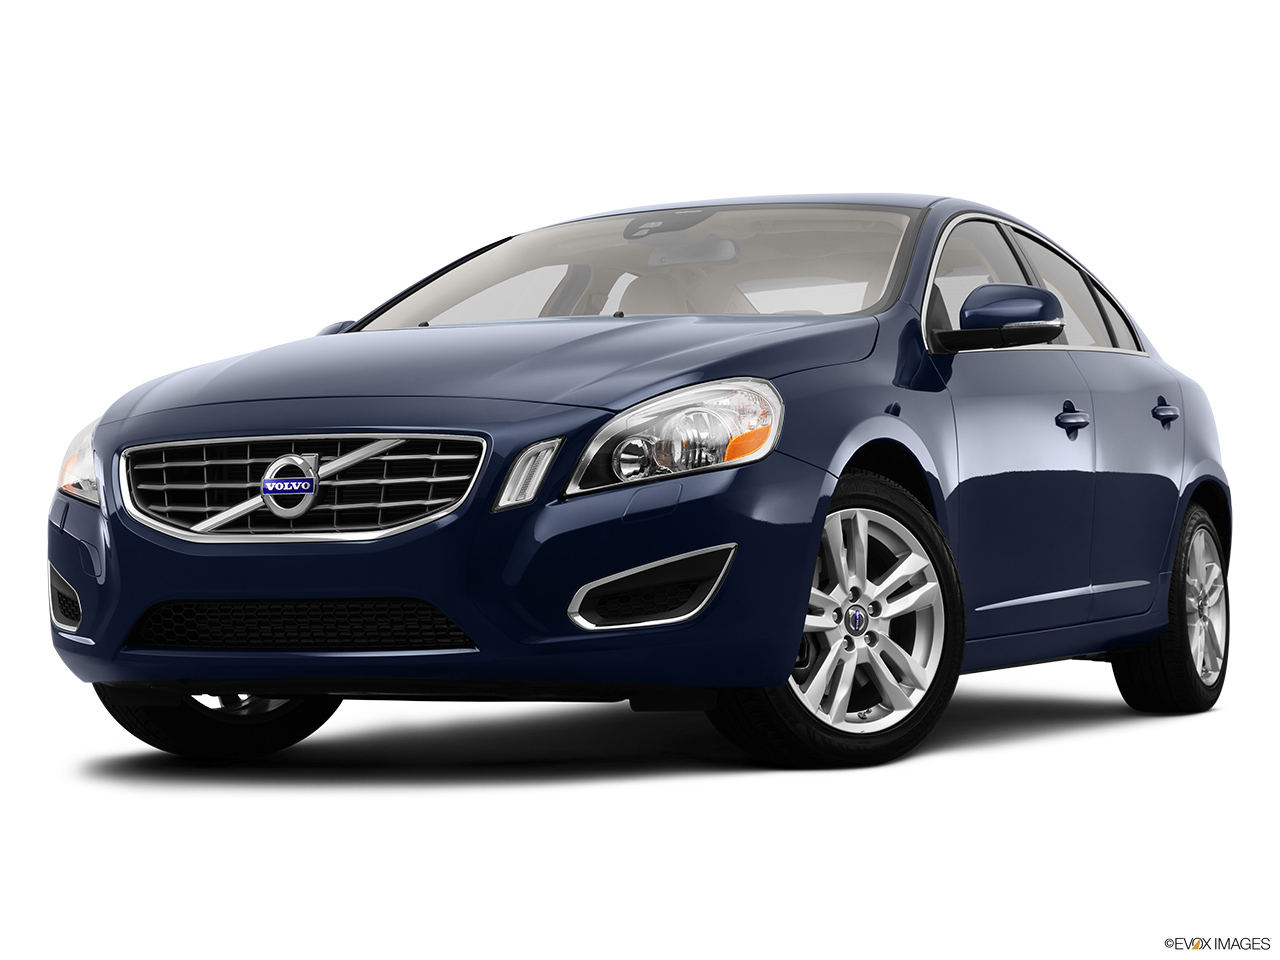 2013 Volvo S60 T5 FWD Premier Front angle view, low wide perspective. 